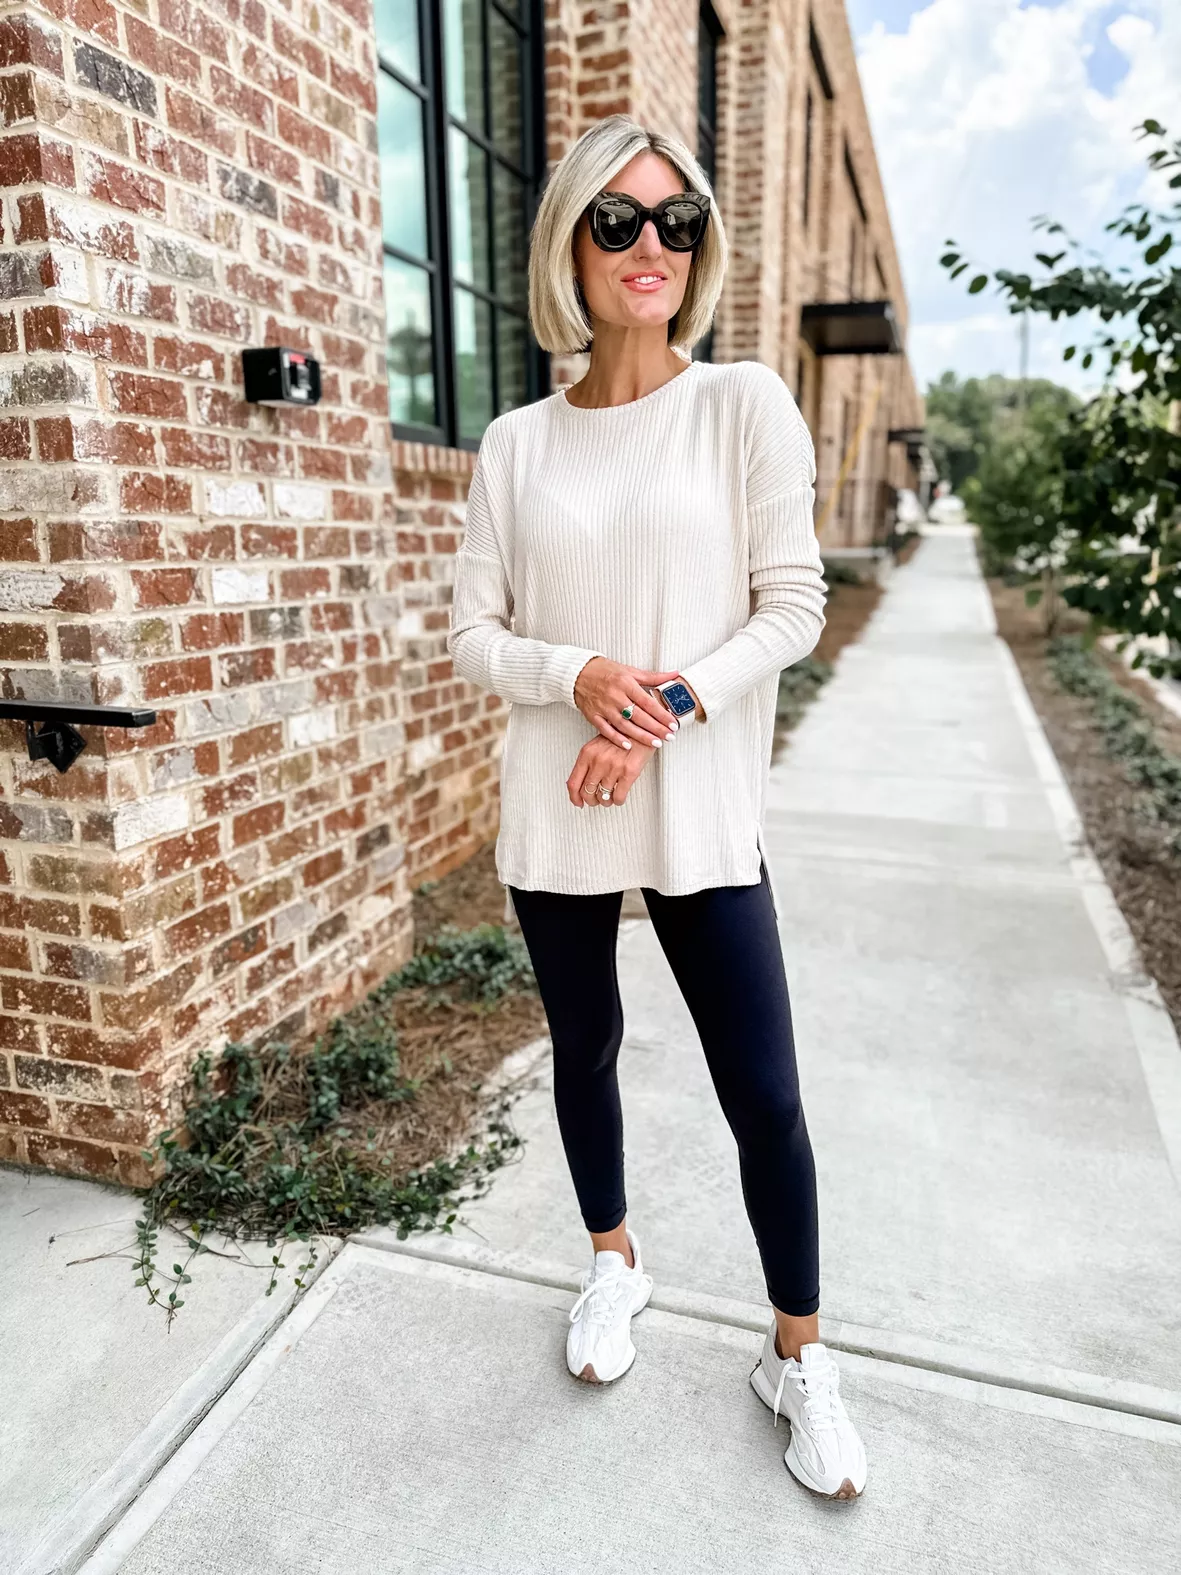 This  tunic is my favorite top for fall - TODAY